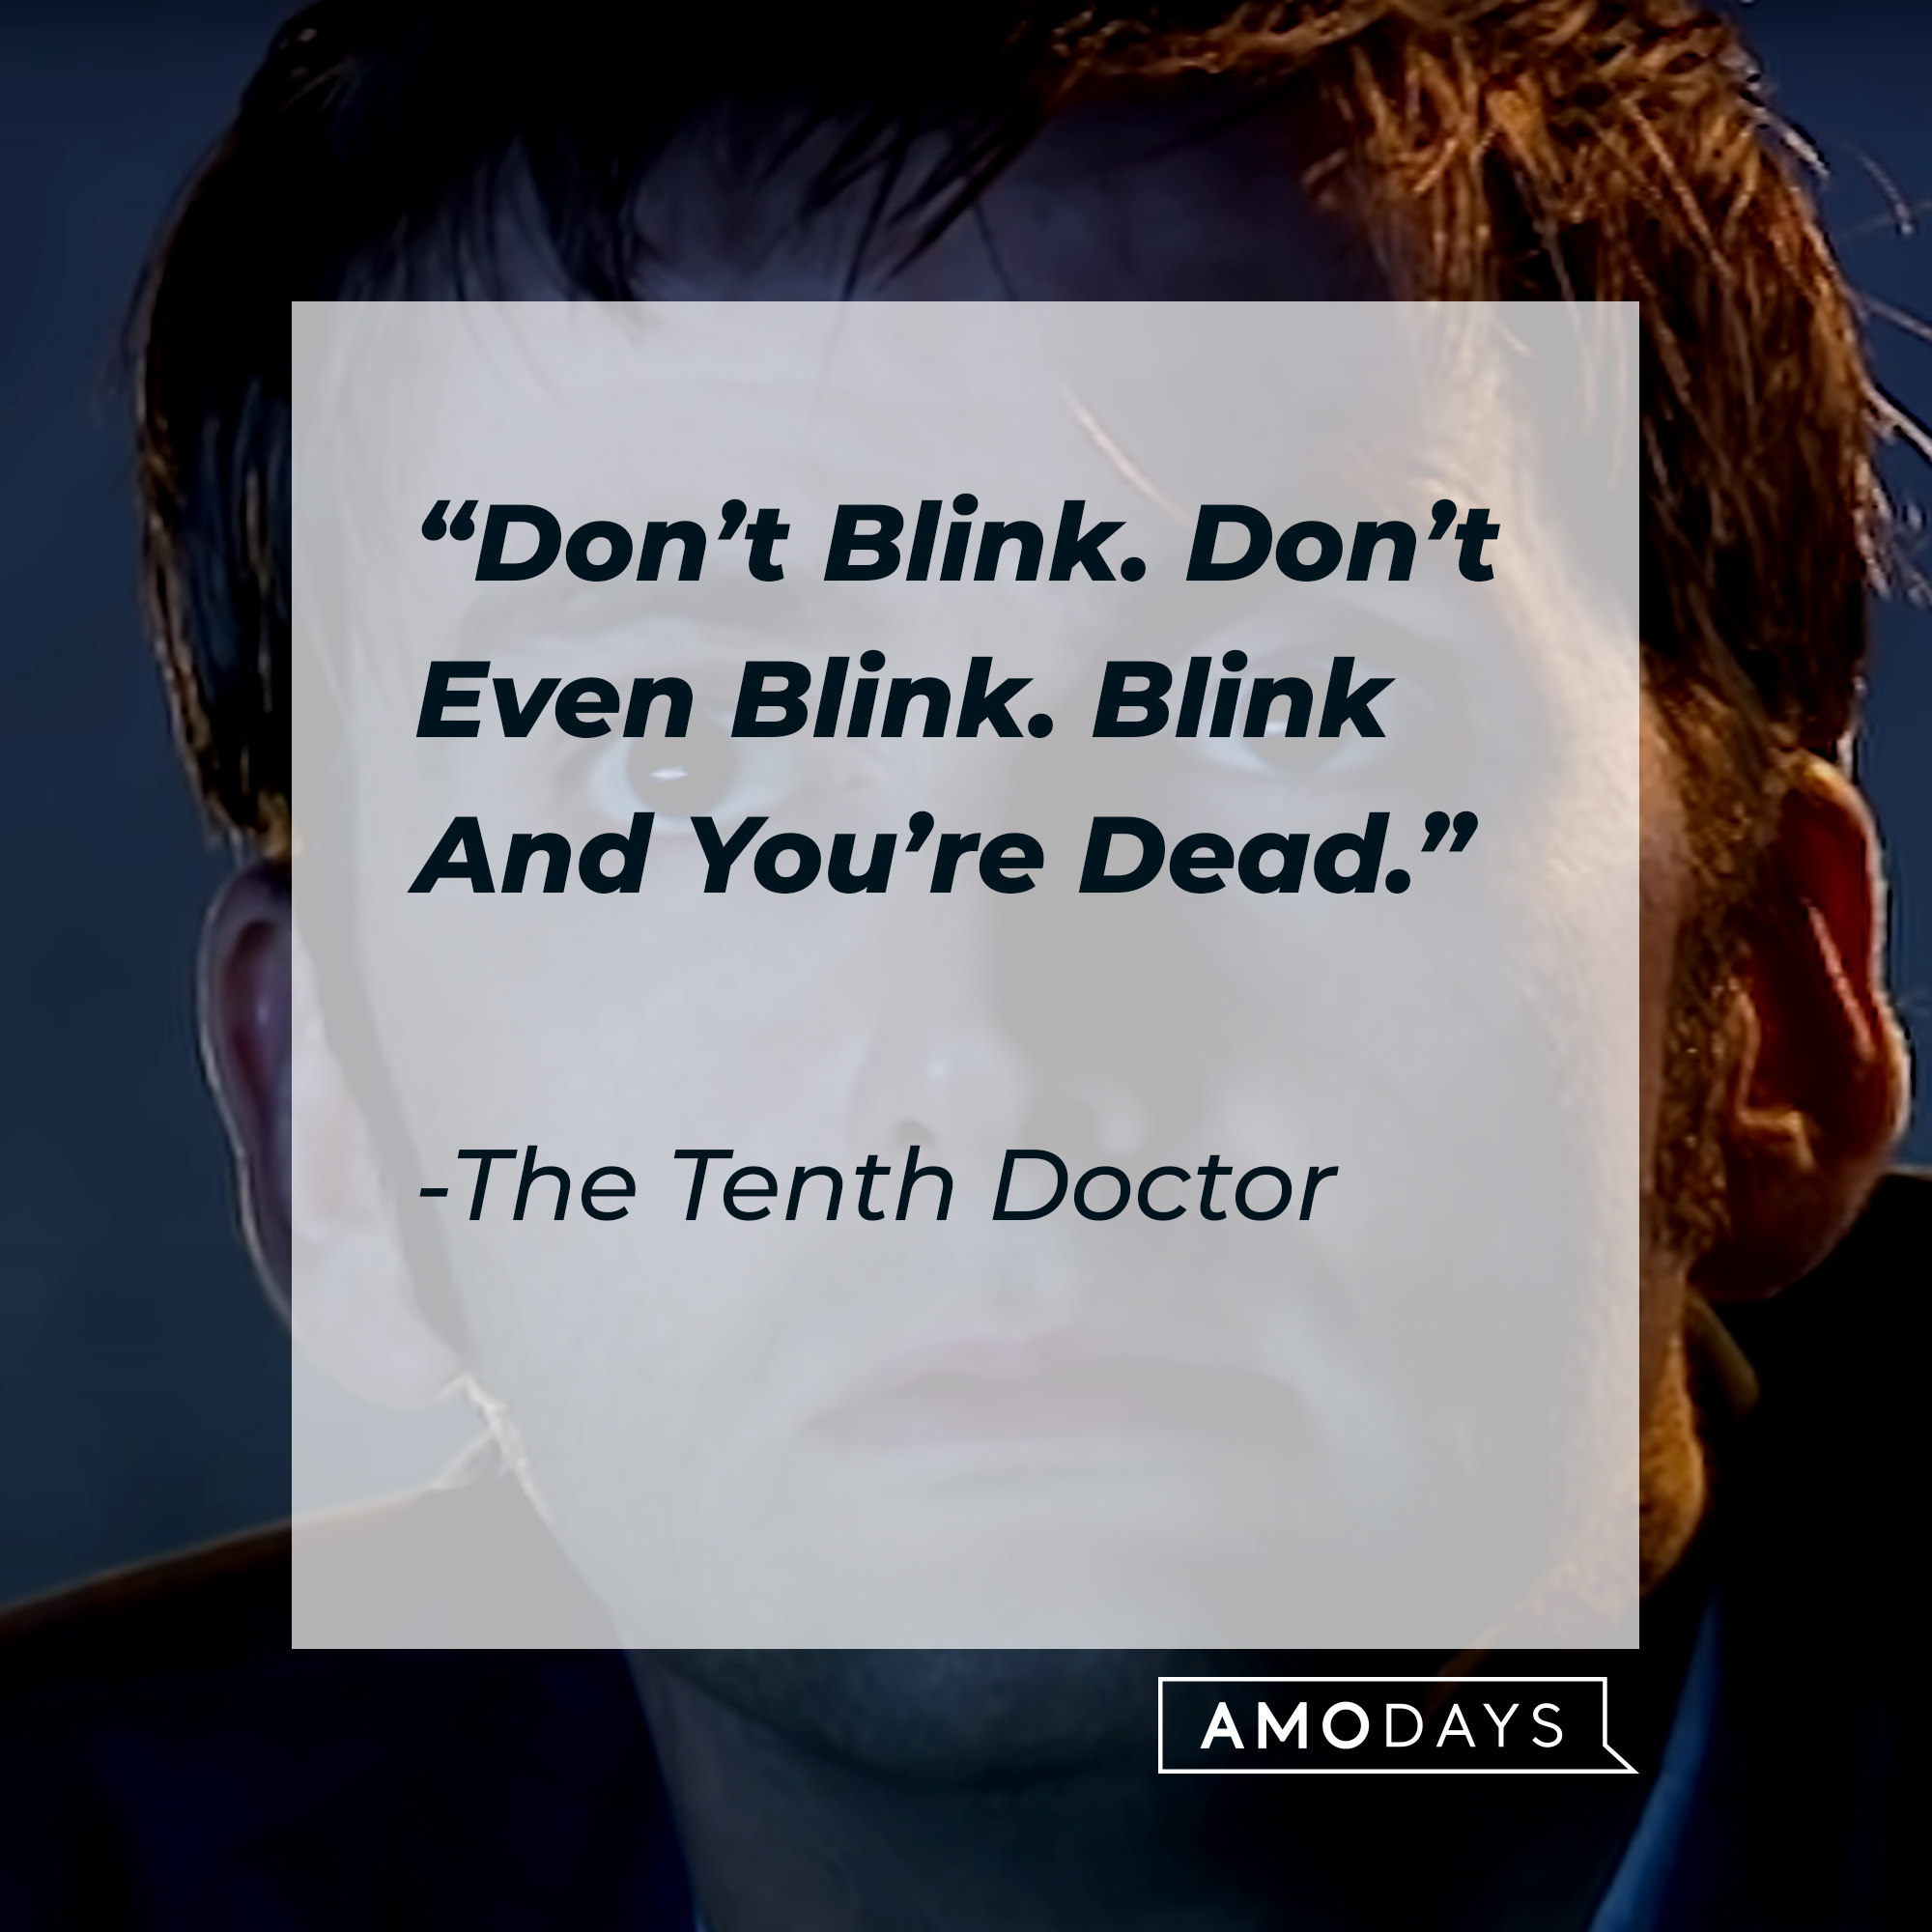 The Tenth Doctor's quote: "Don't Blink. Don't Even Blink. Blink And You're Dead." | Source: youtube.com/DoctorWho